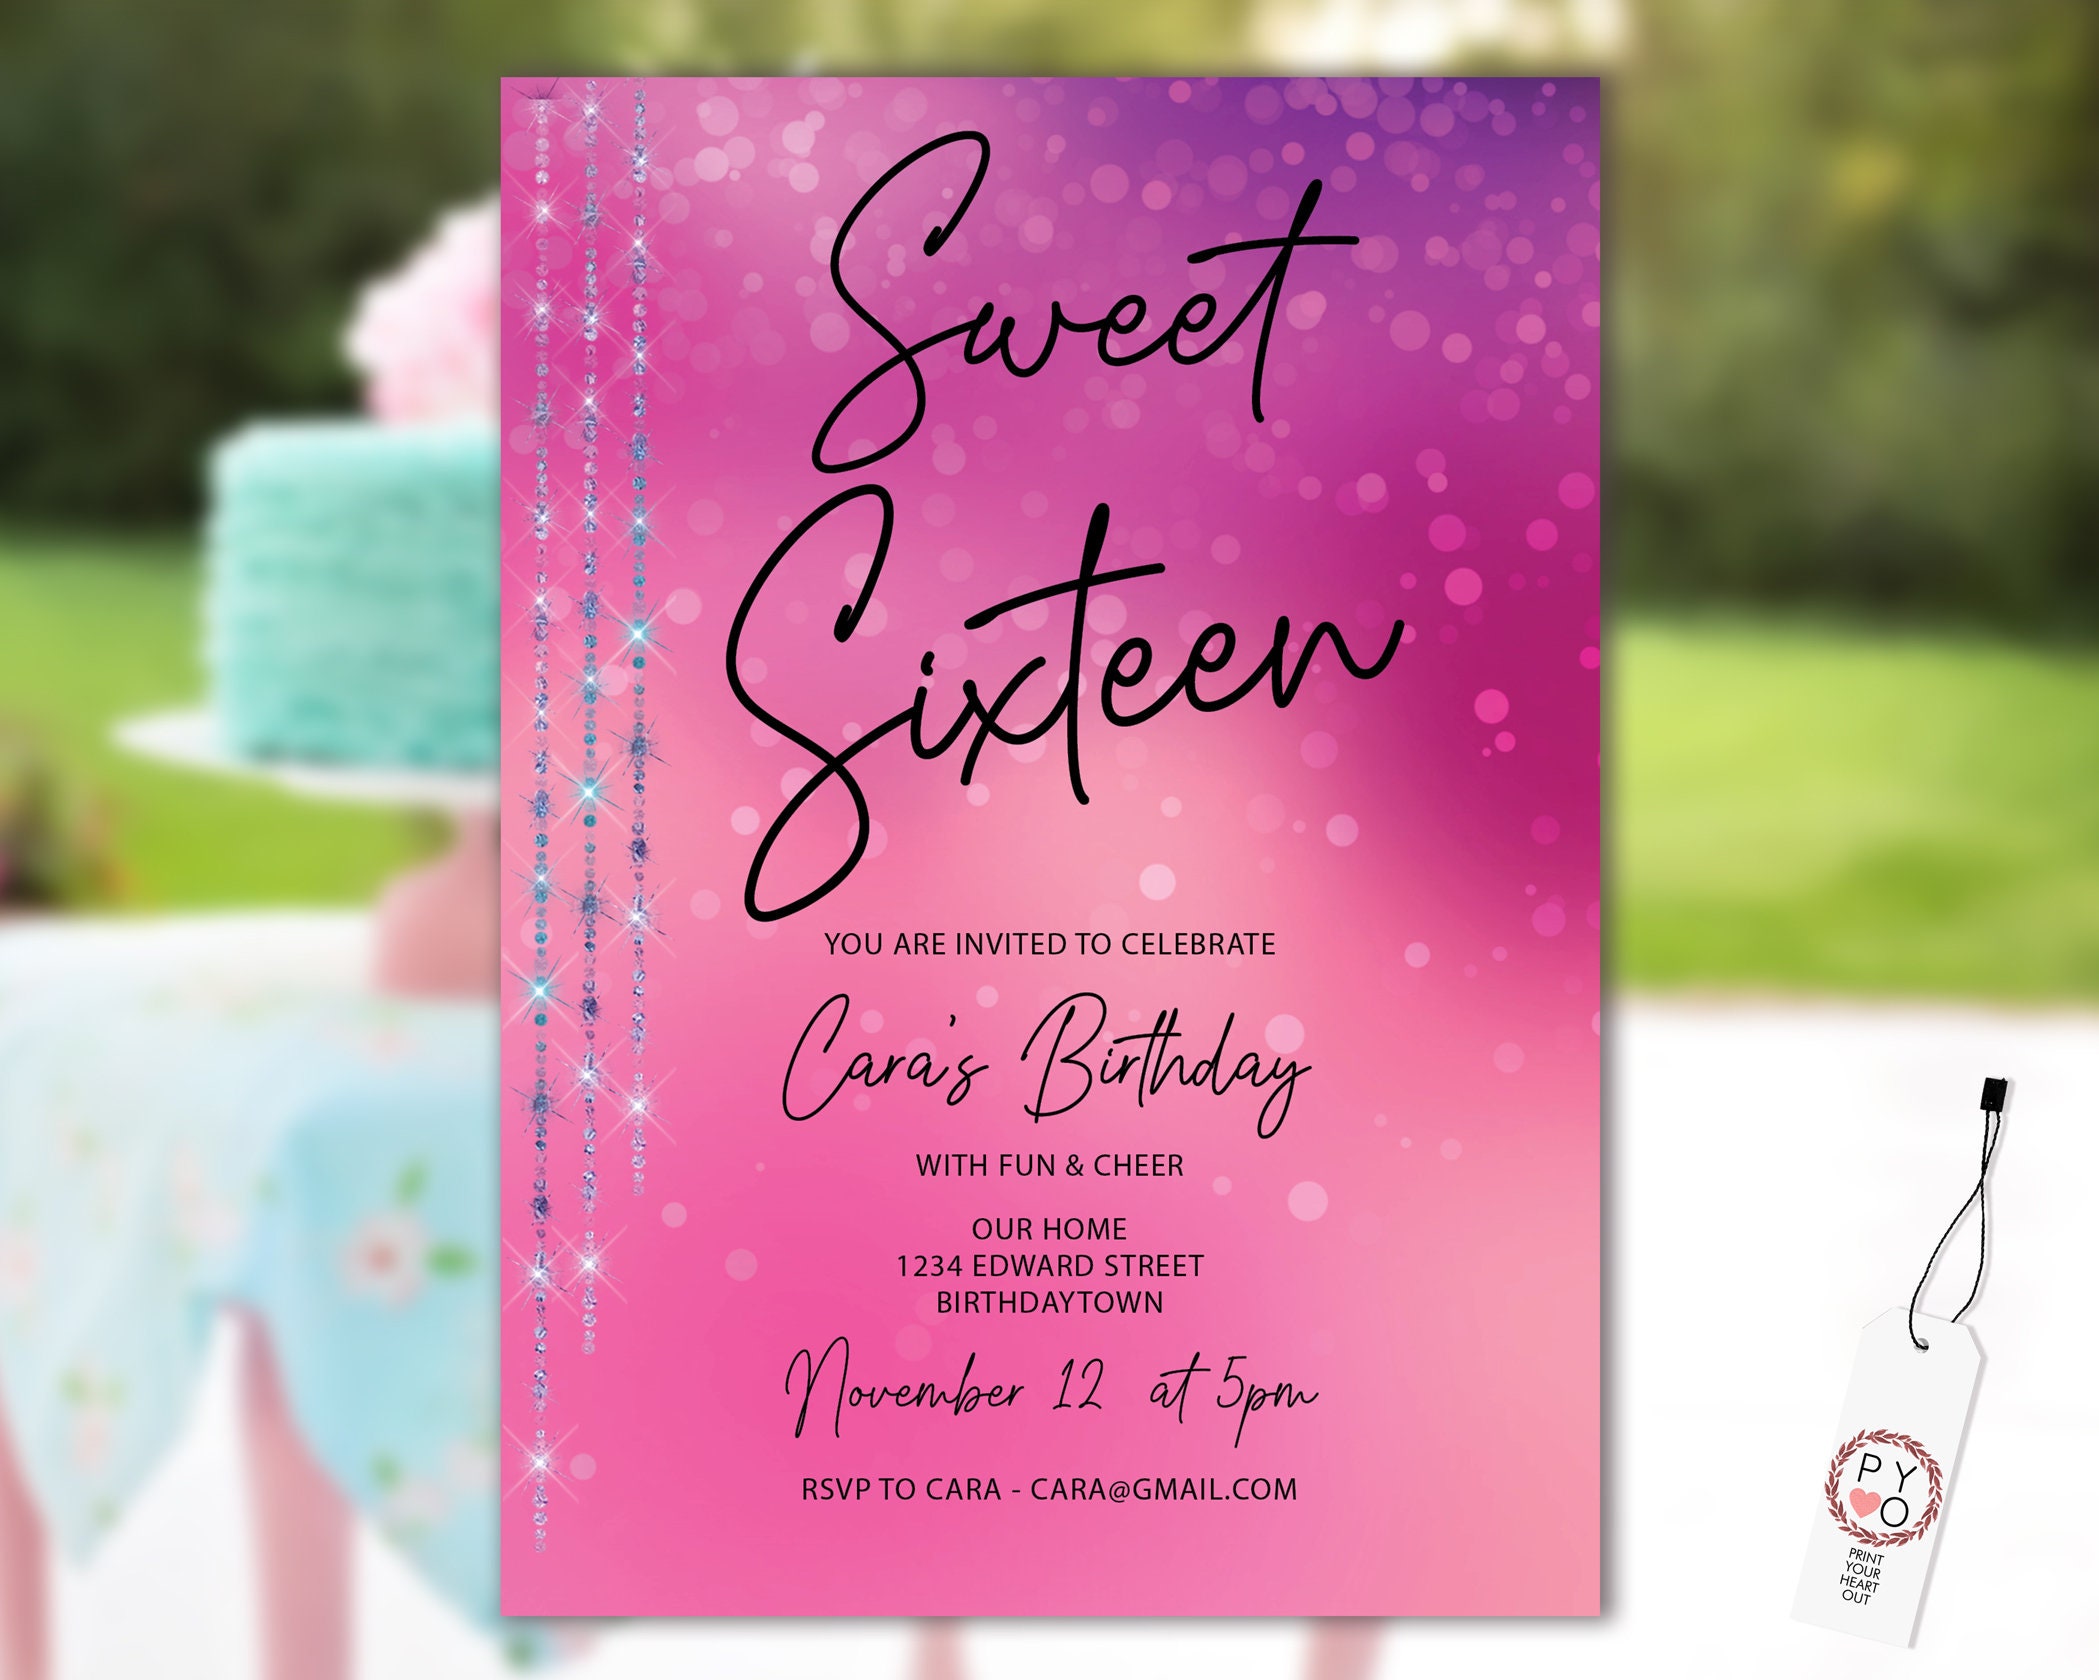 sweet-16-party-invitation-printable-template-bright-pink-editable